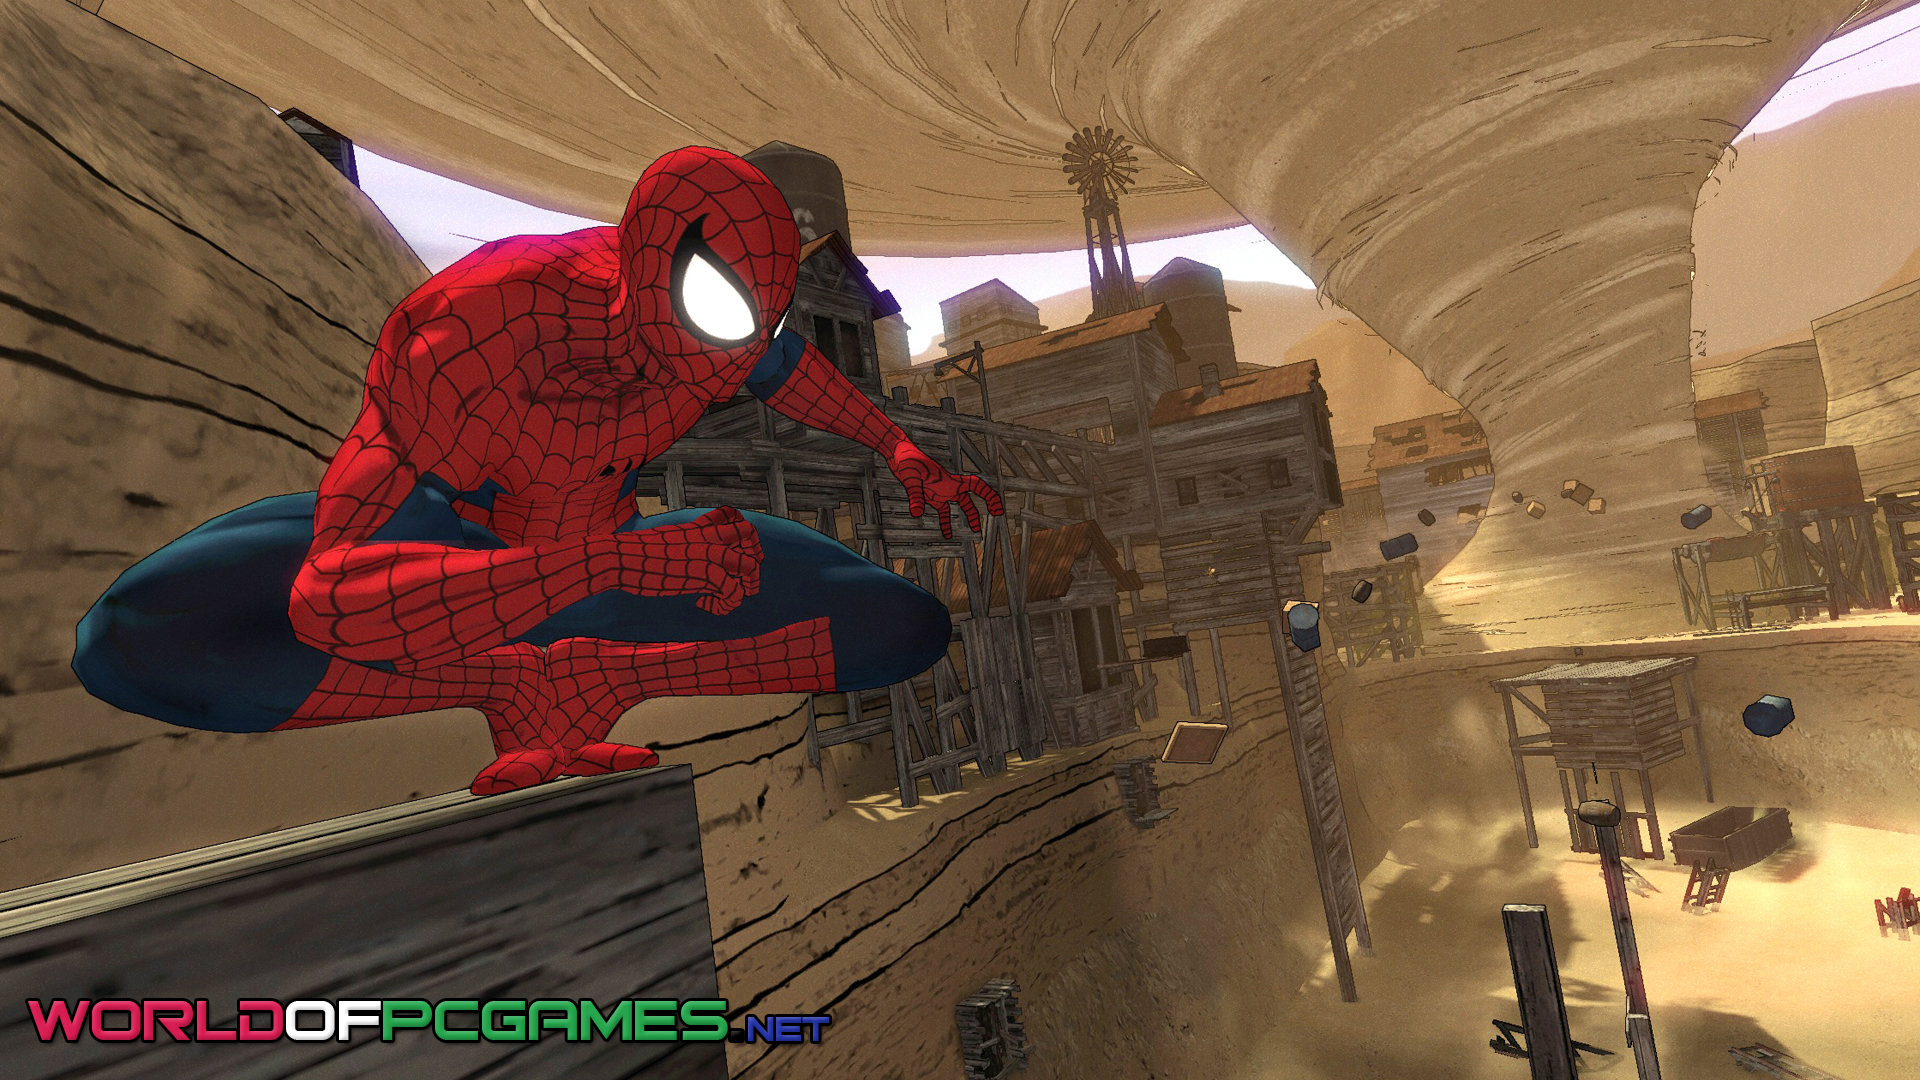 Spider Man Shattered Dimensions Free Download PC Game By worldof-pcgames.netm